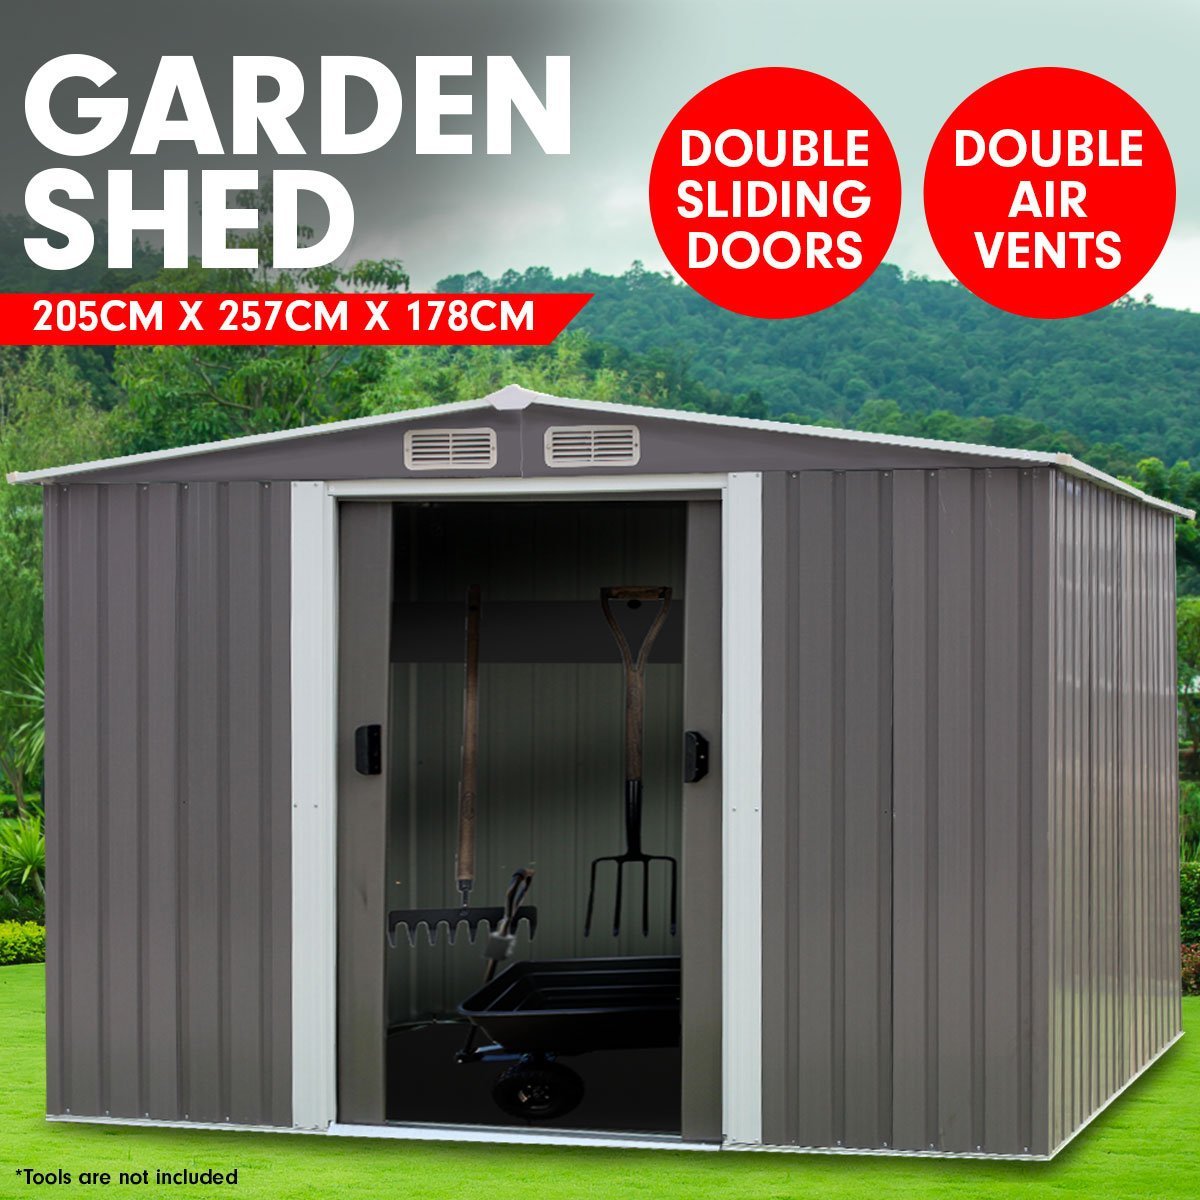 Shed Wallaroo Garden Shed Gable Roof 6ft x 8ft Outdoor Storage - Grey